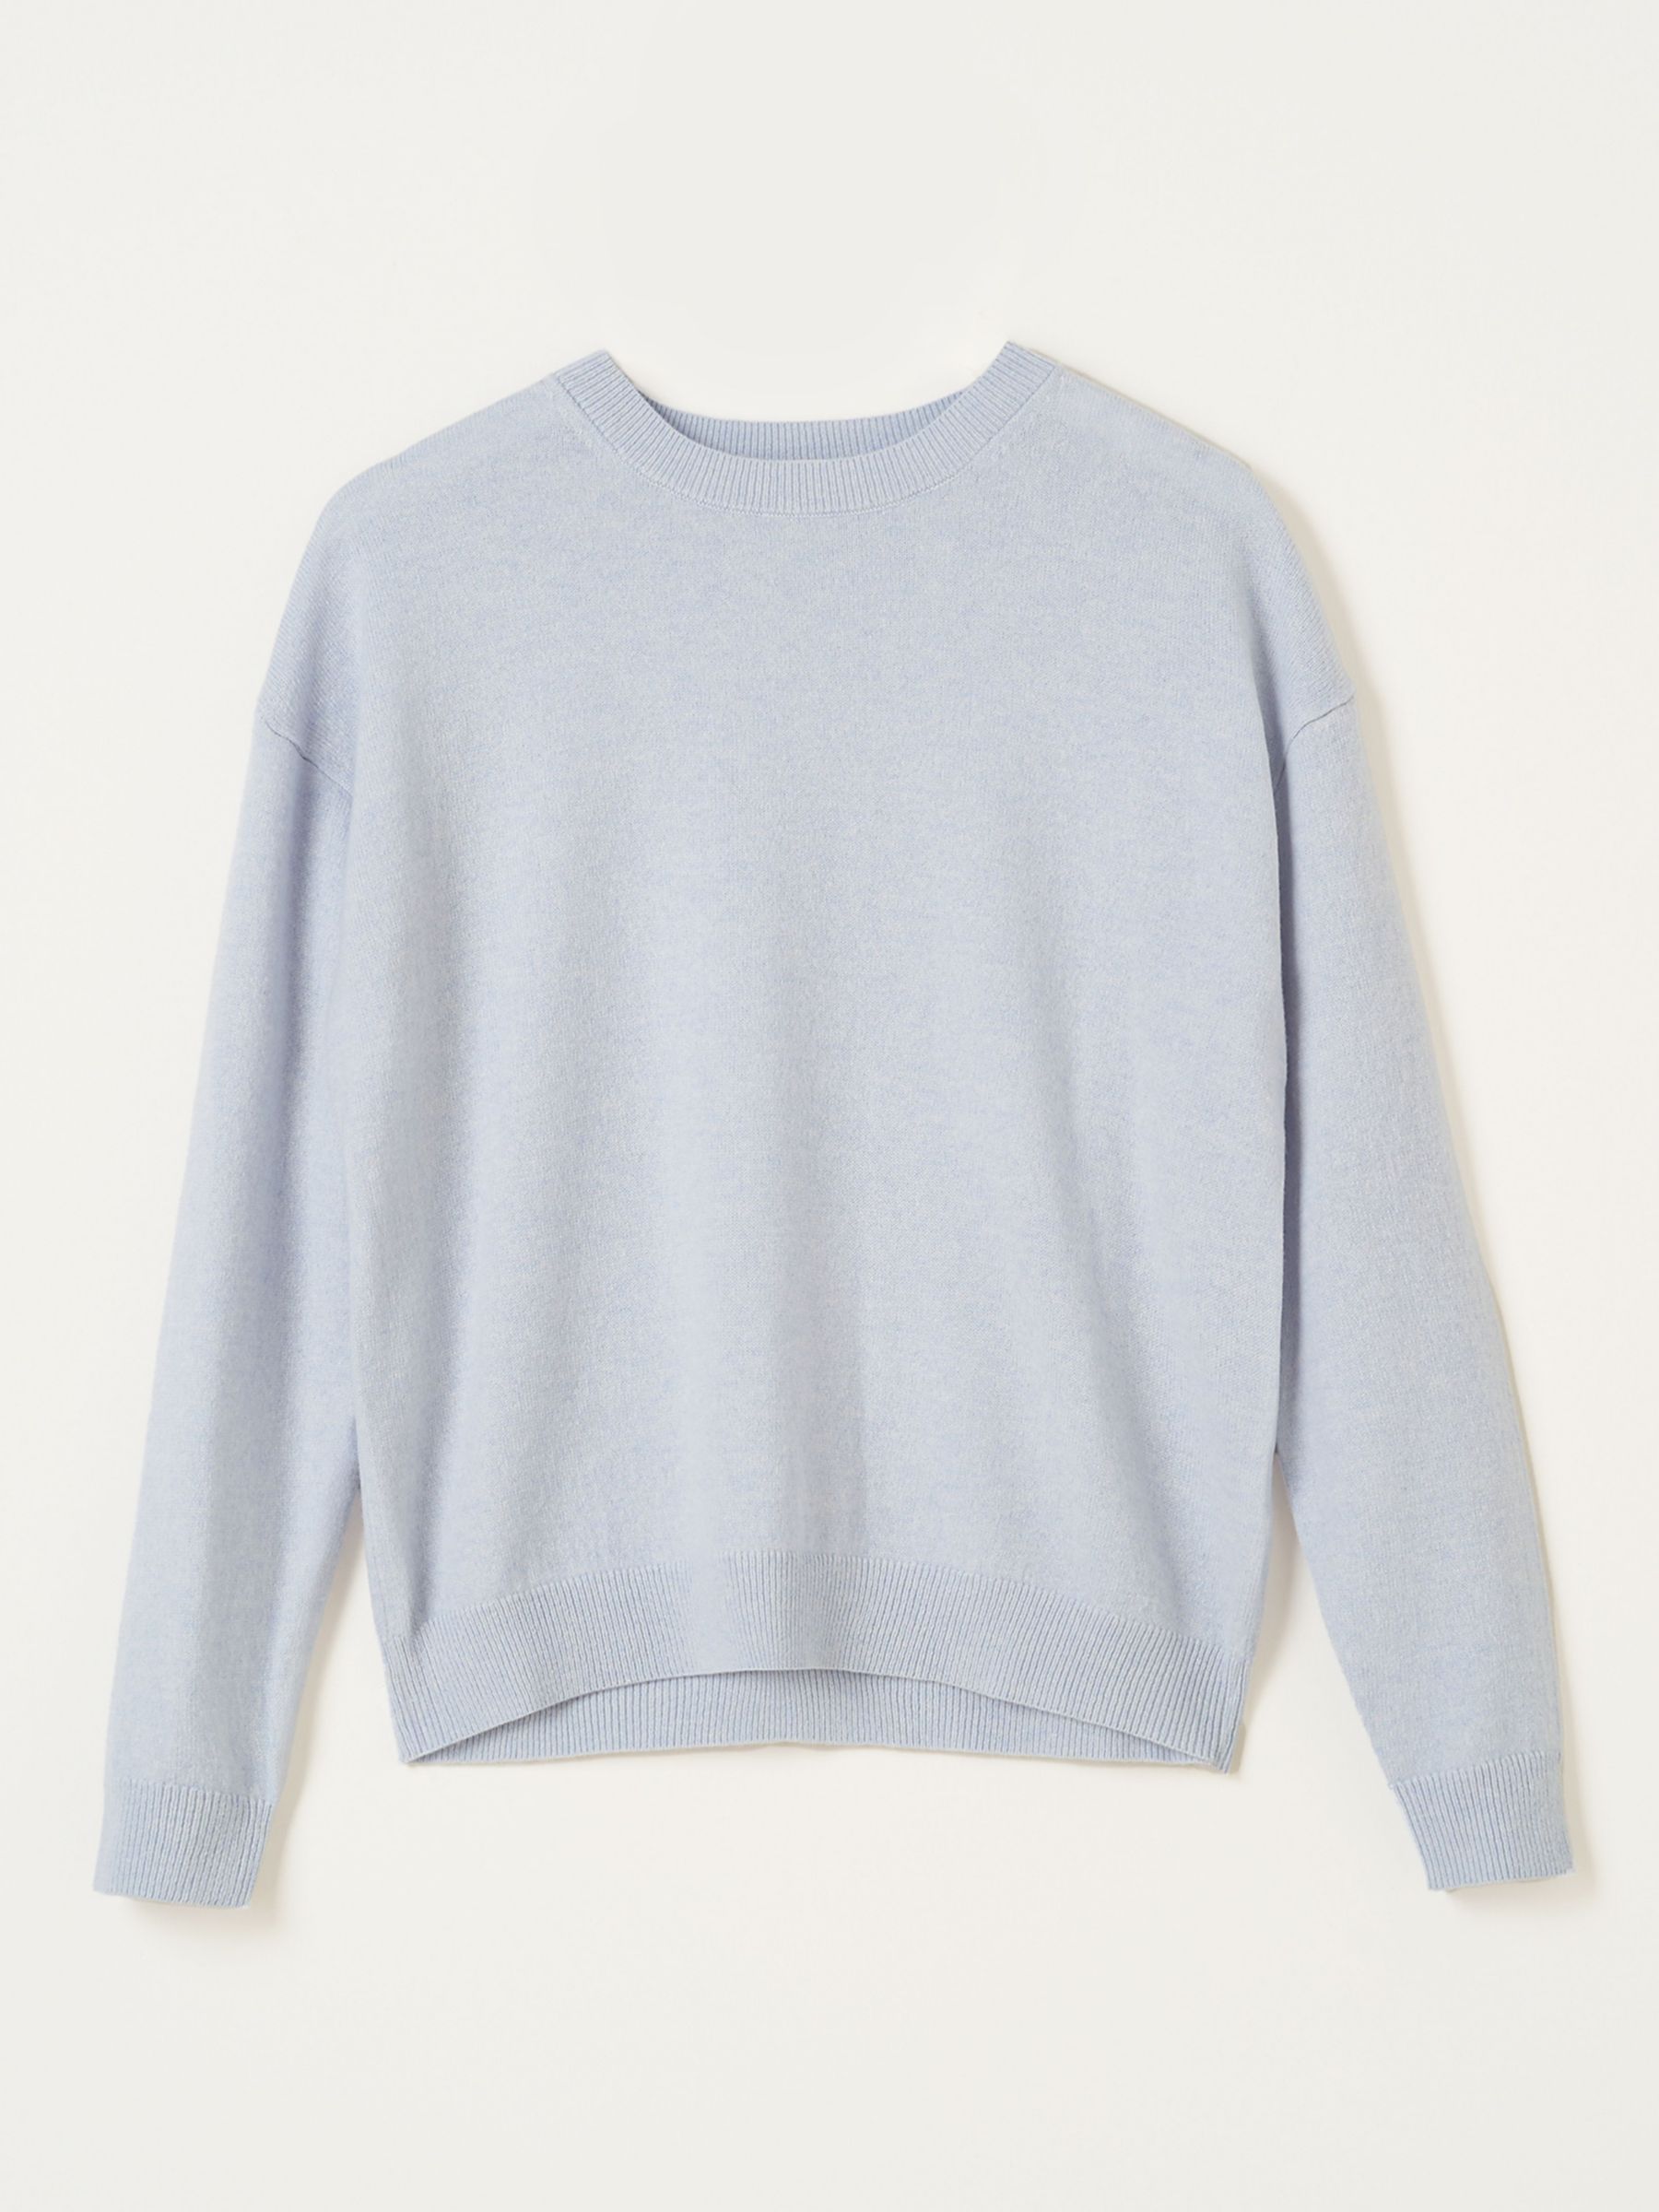 Truly Round Neck Wool Cashmere Blend Jumper, Blue at John Lewis & Partners